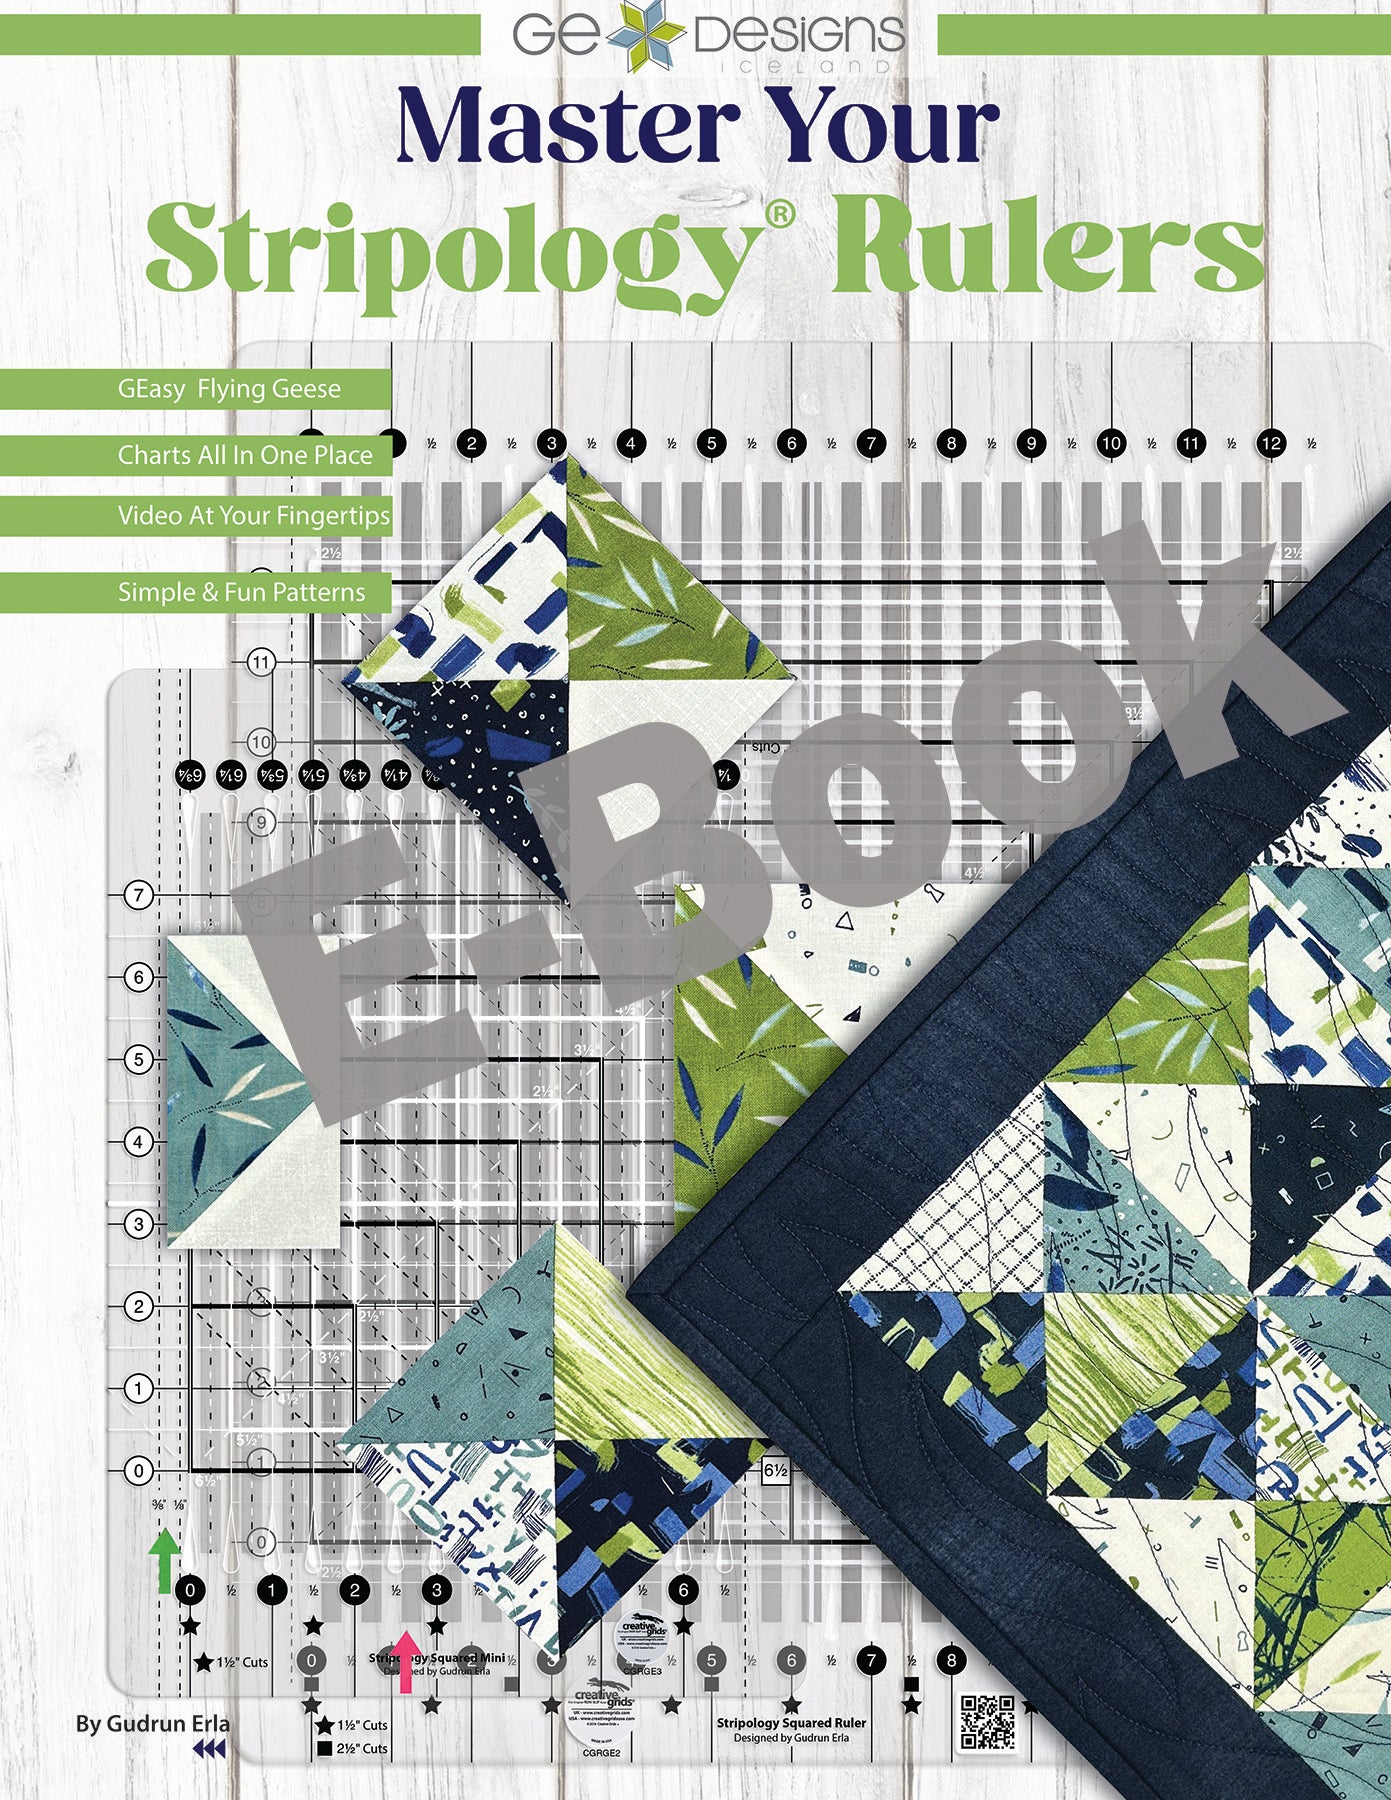 Master Your Stripology Rulers Book by GE Designs